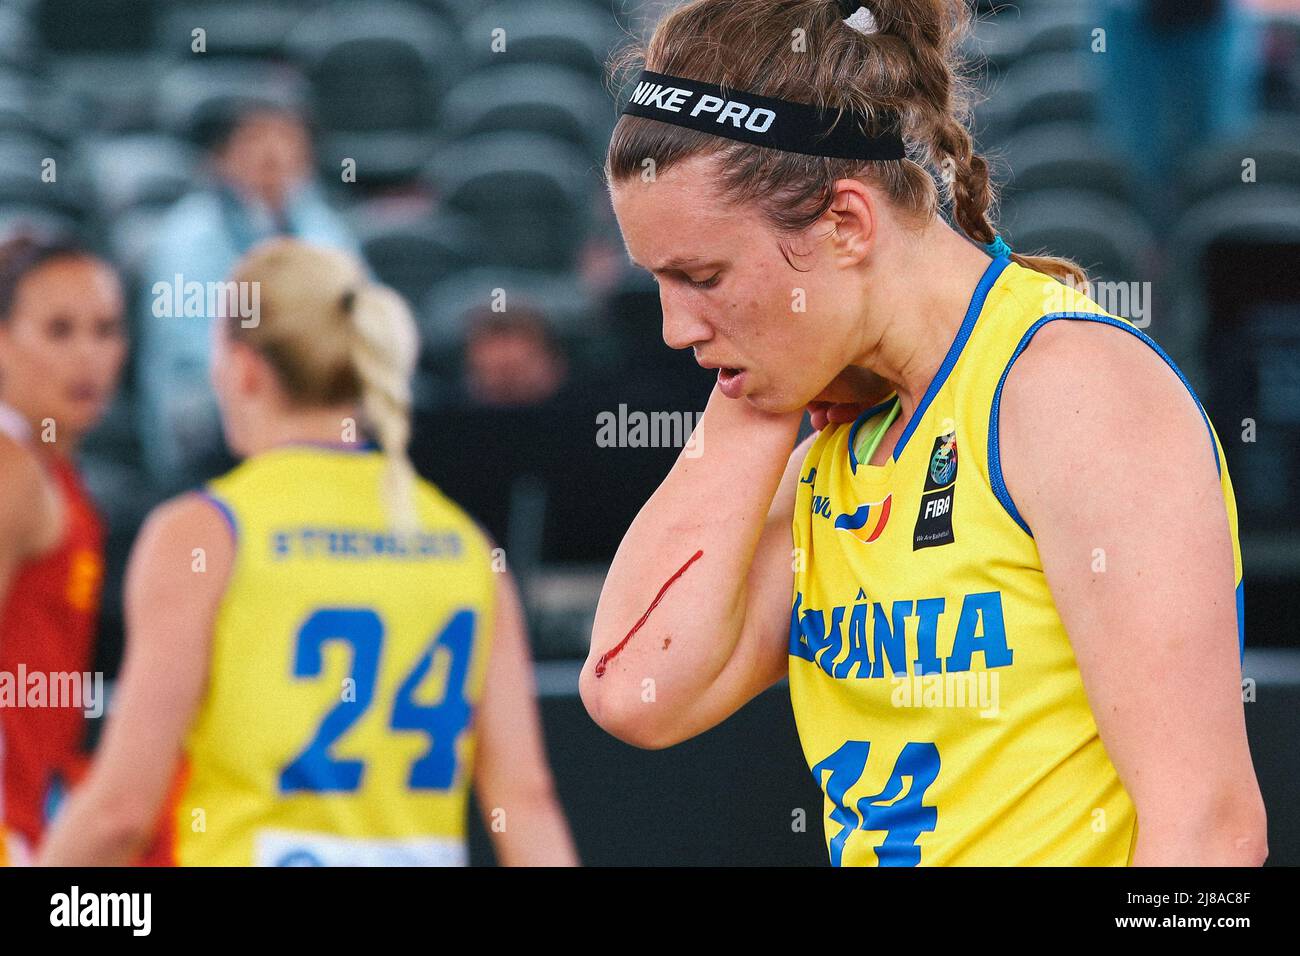 Amsterdam, Netherlands, June 20, 2019:Gabriela Marginean injuried during the FIBA basketball 3x3 world cup 2019 in Amsterdam Stock Photo